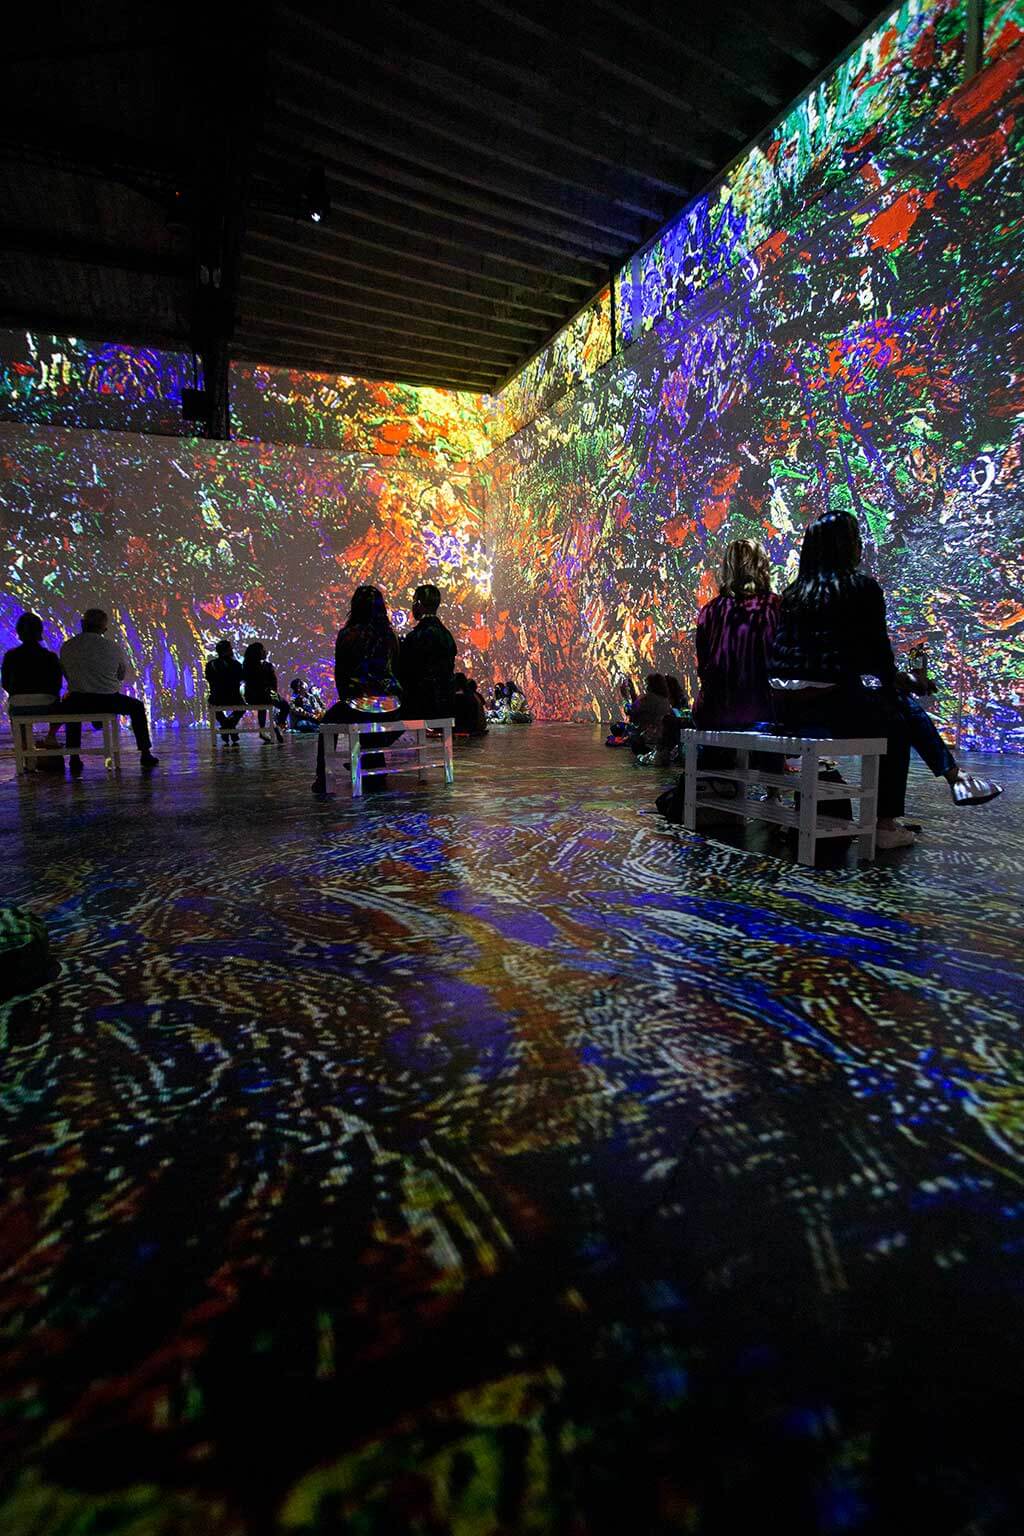 drive-swim-fly-san-francisco-vincent-van-gogh-experience-video-exhibit-projection-colorful-flowers-painting